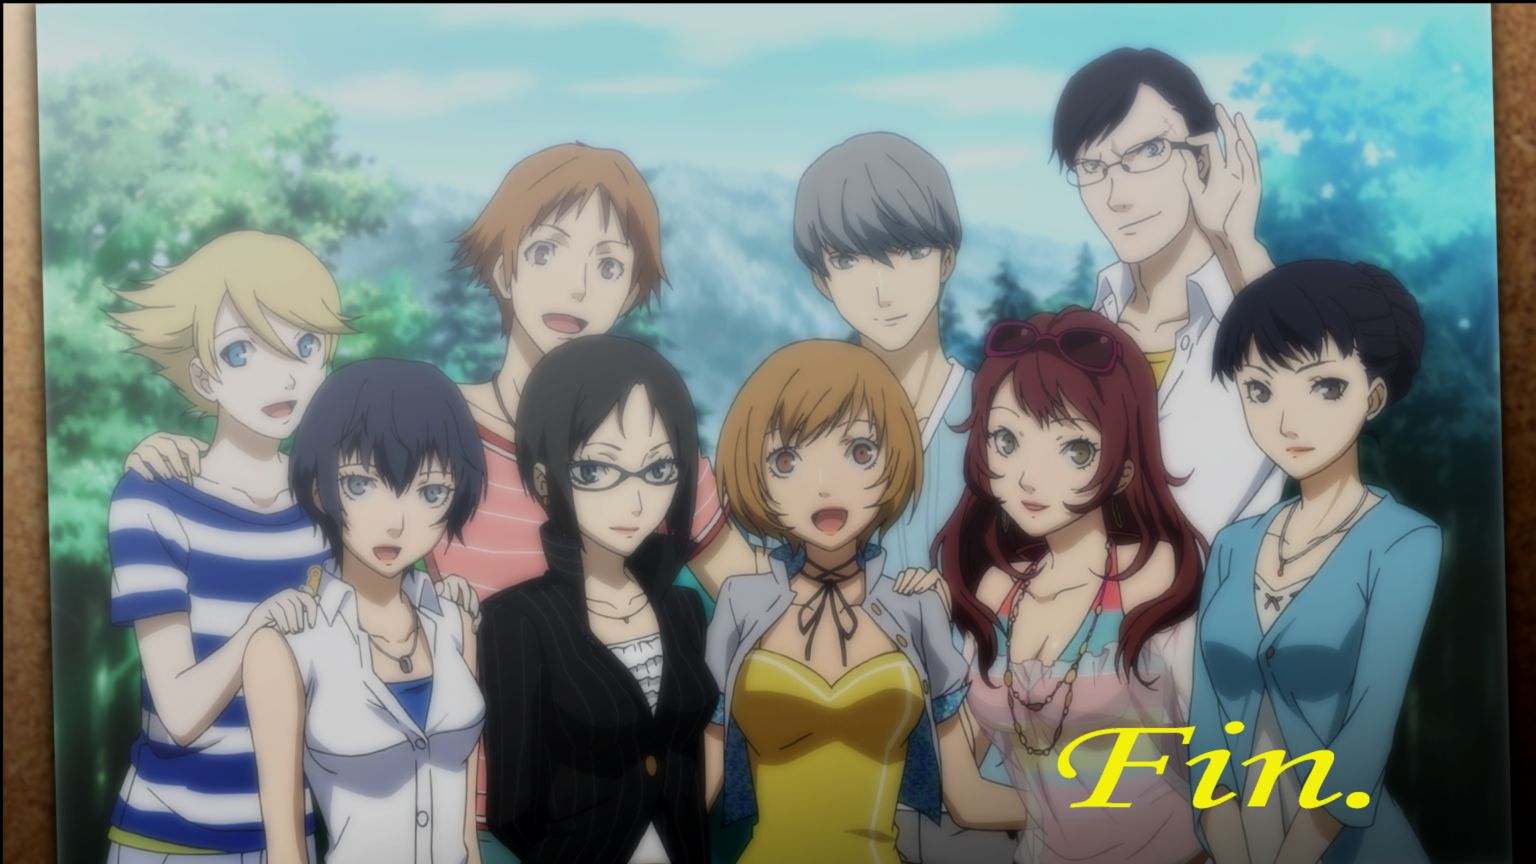 Game completed screen from Persona 4 showing the animation version of all the characters.